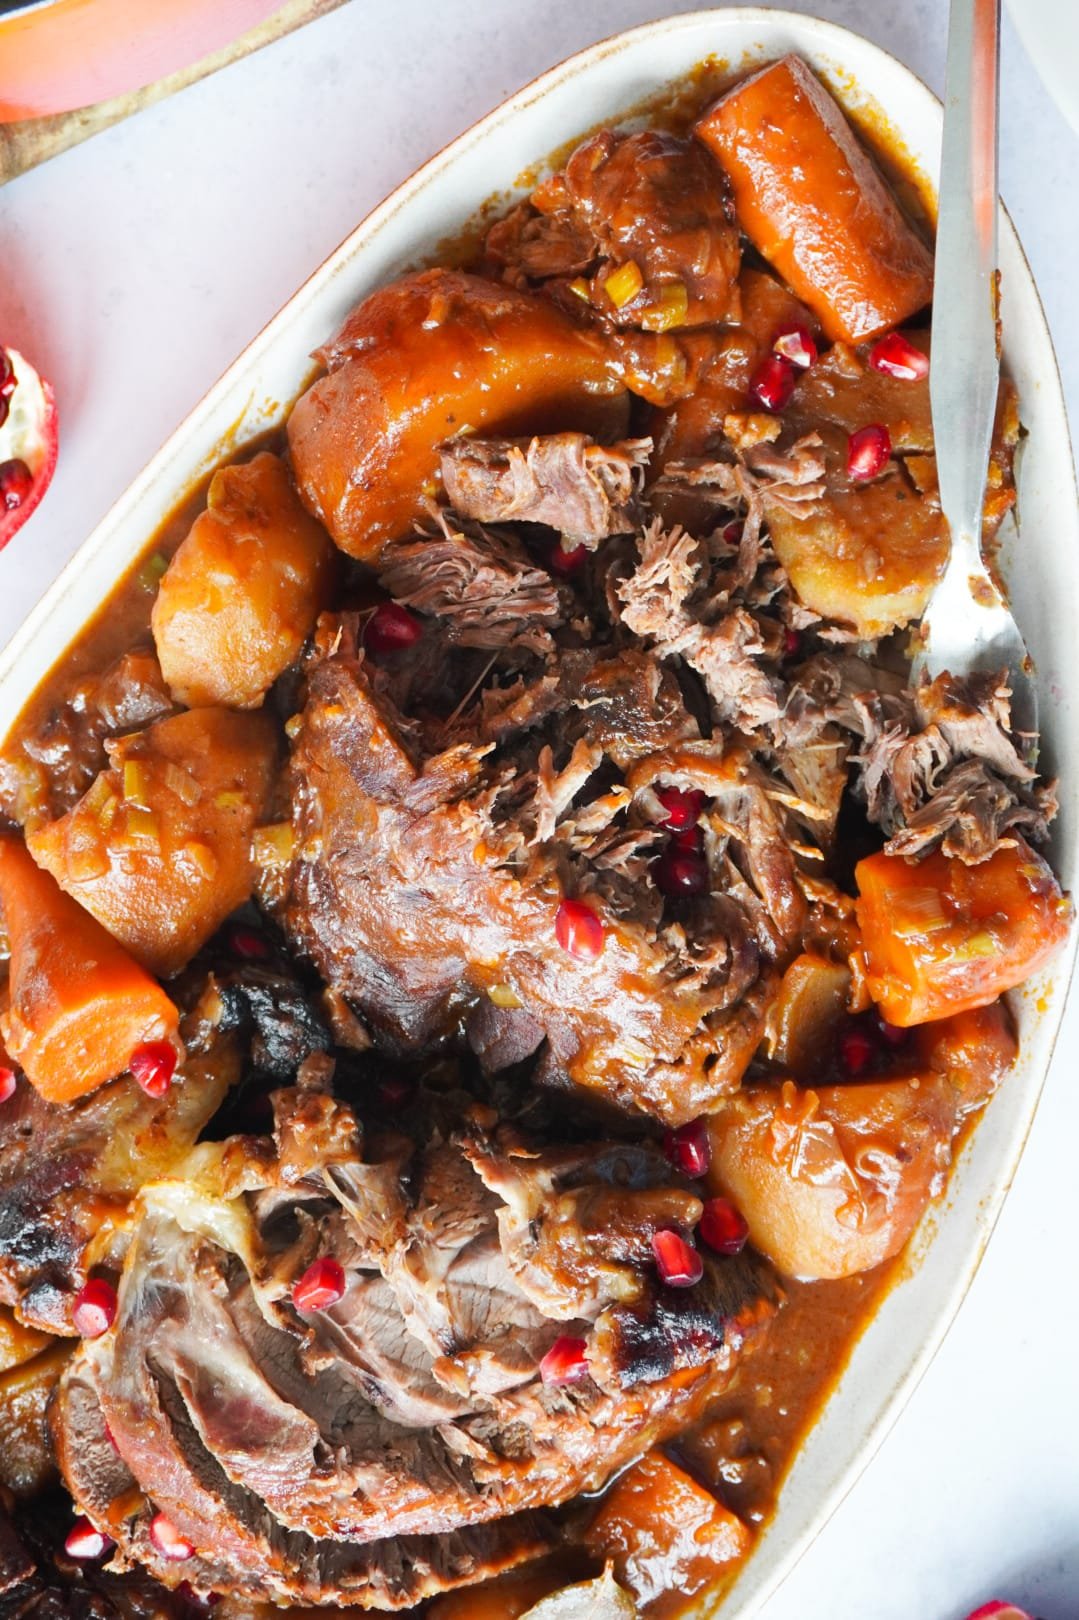 Beef shanks with pomegranate seeds served beautifully with vegetables